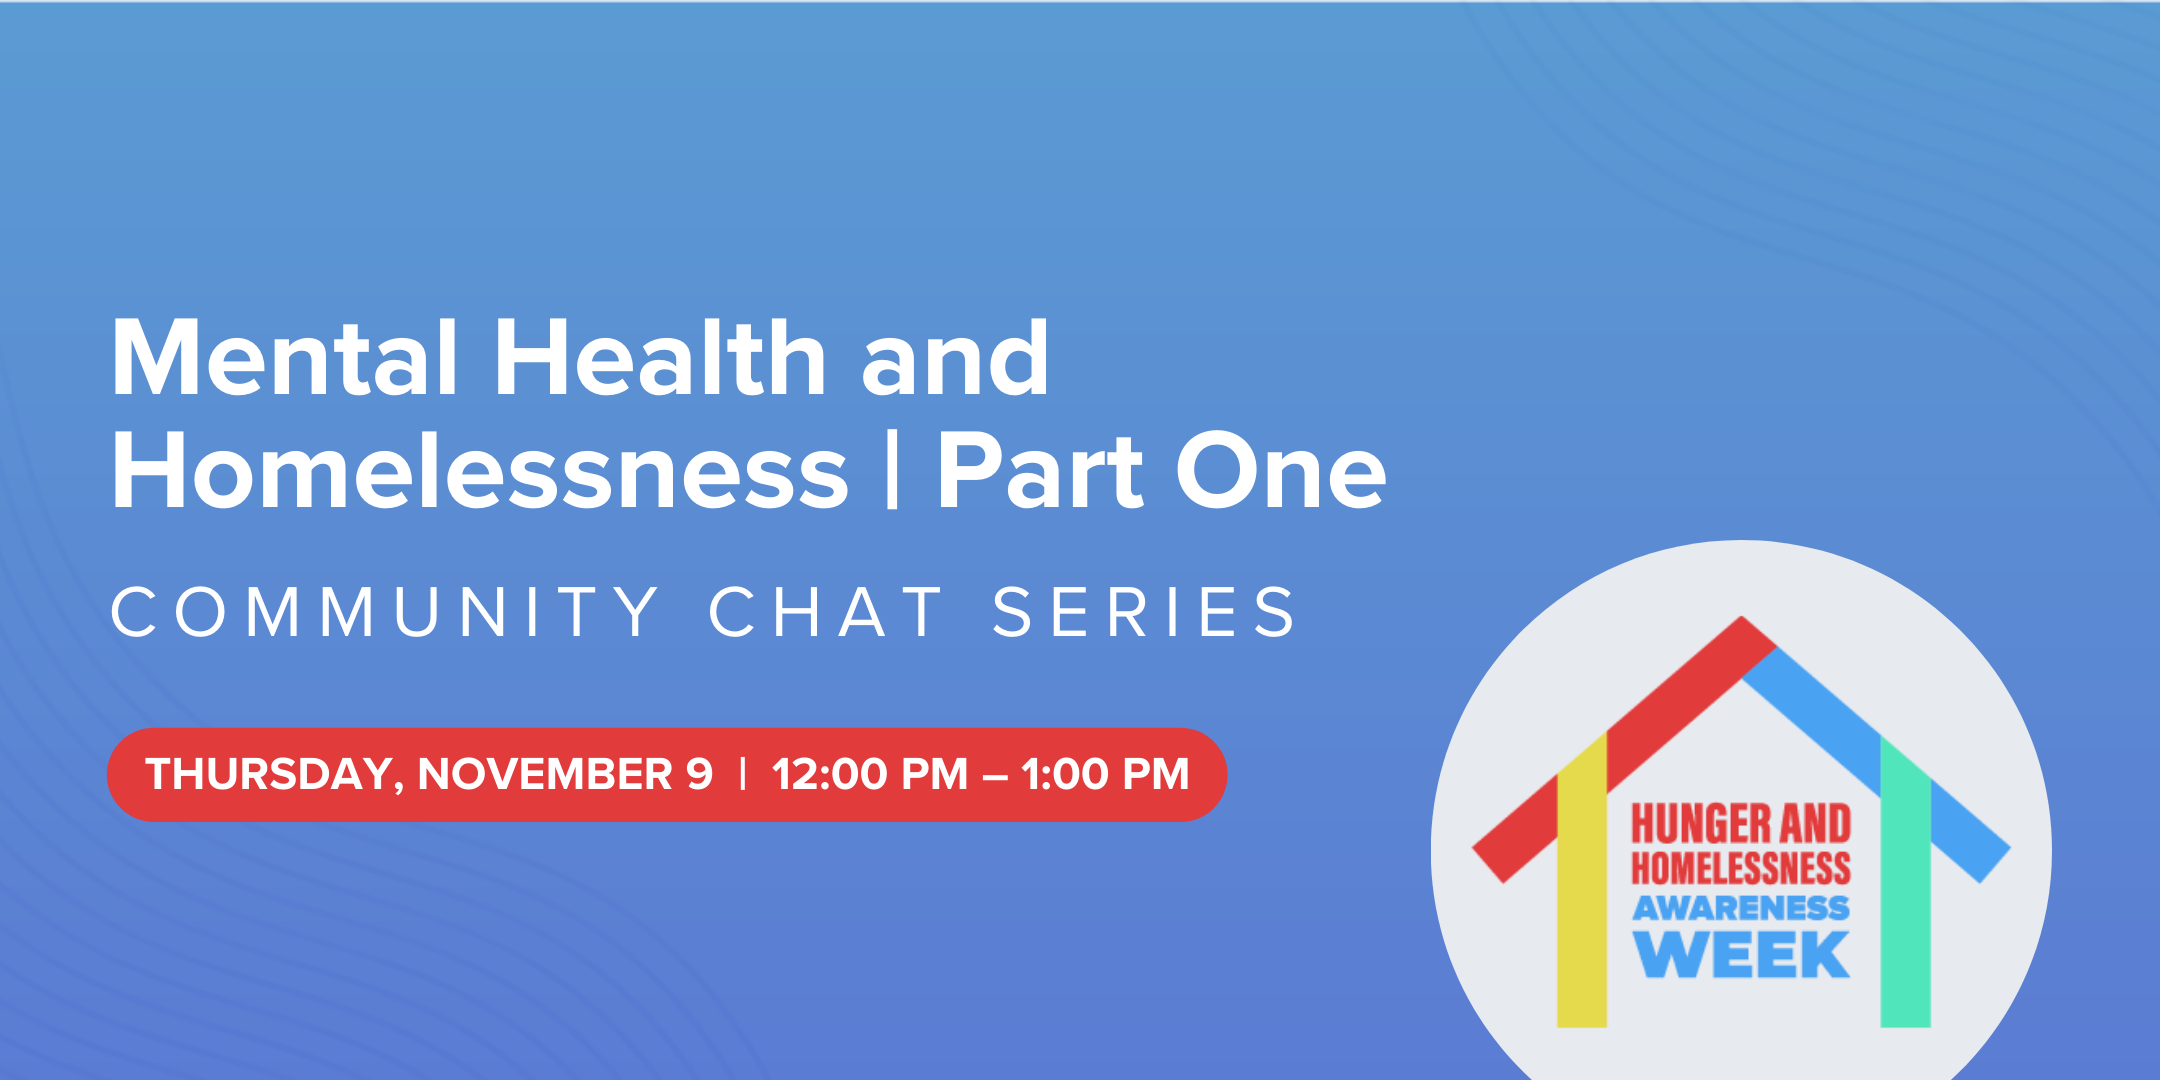 Mental Health and Homelessness Part One Community Chat